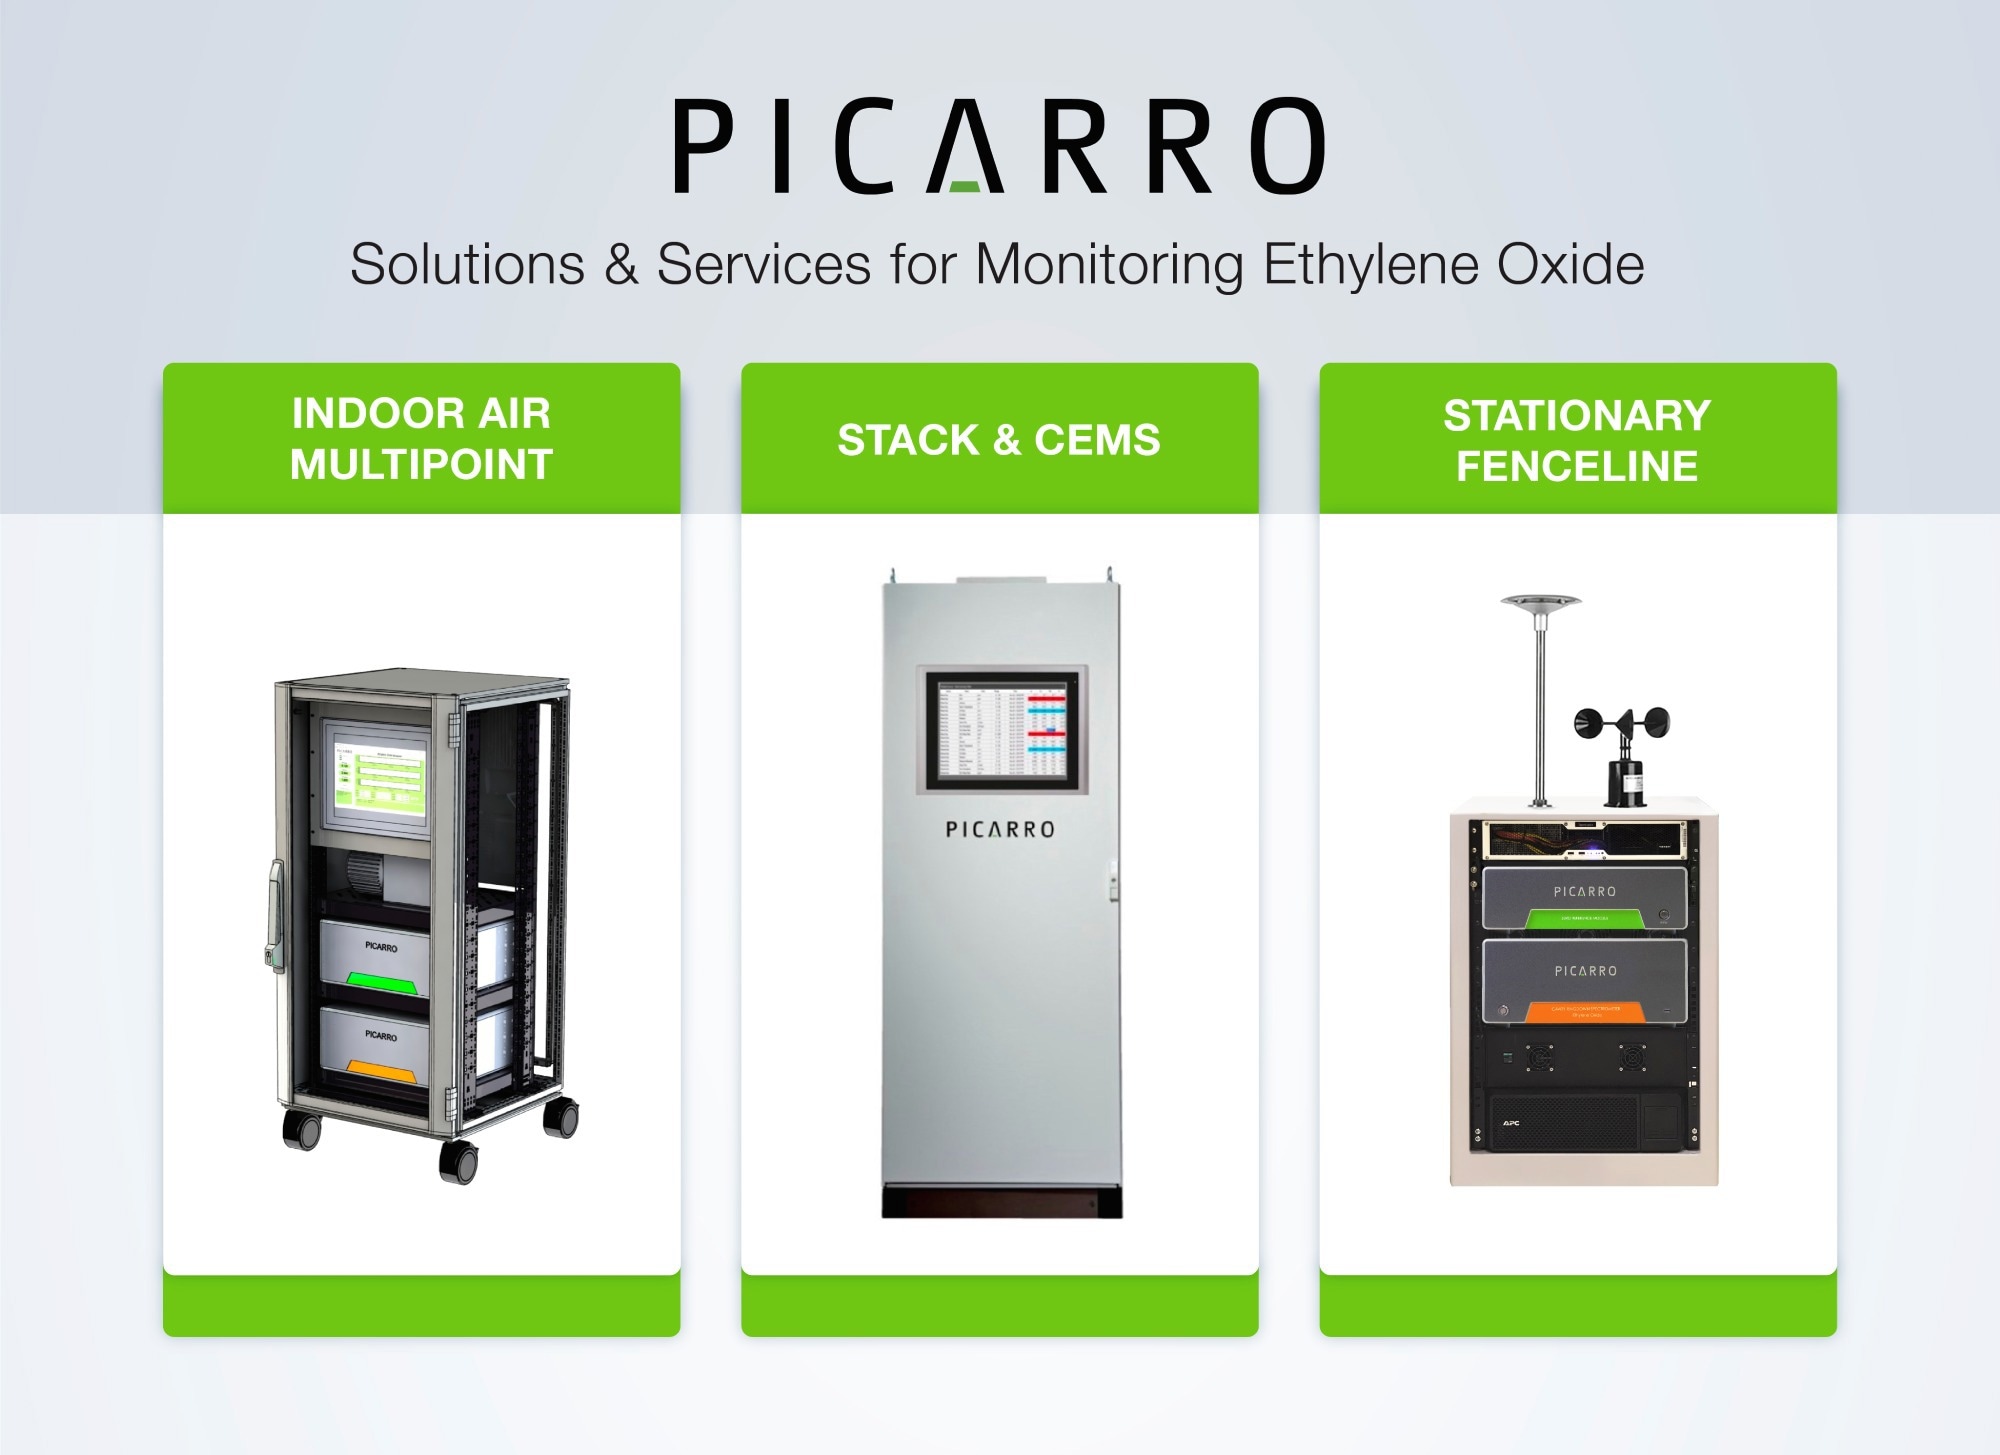 Picarro Cavity Ring-Down Spectroscopy Successfully Validated Under EPA’s OTM-47 to Measure Ethylene Oxide Emissions in Real-Time from Stationary Sources